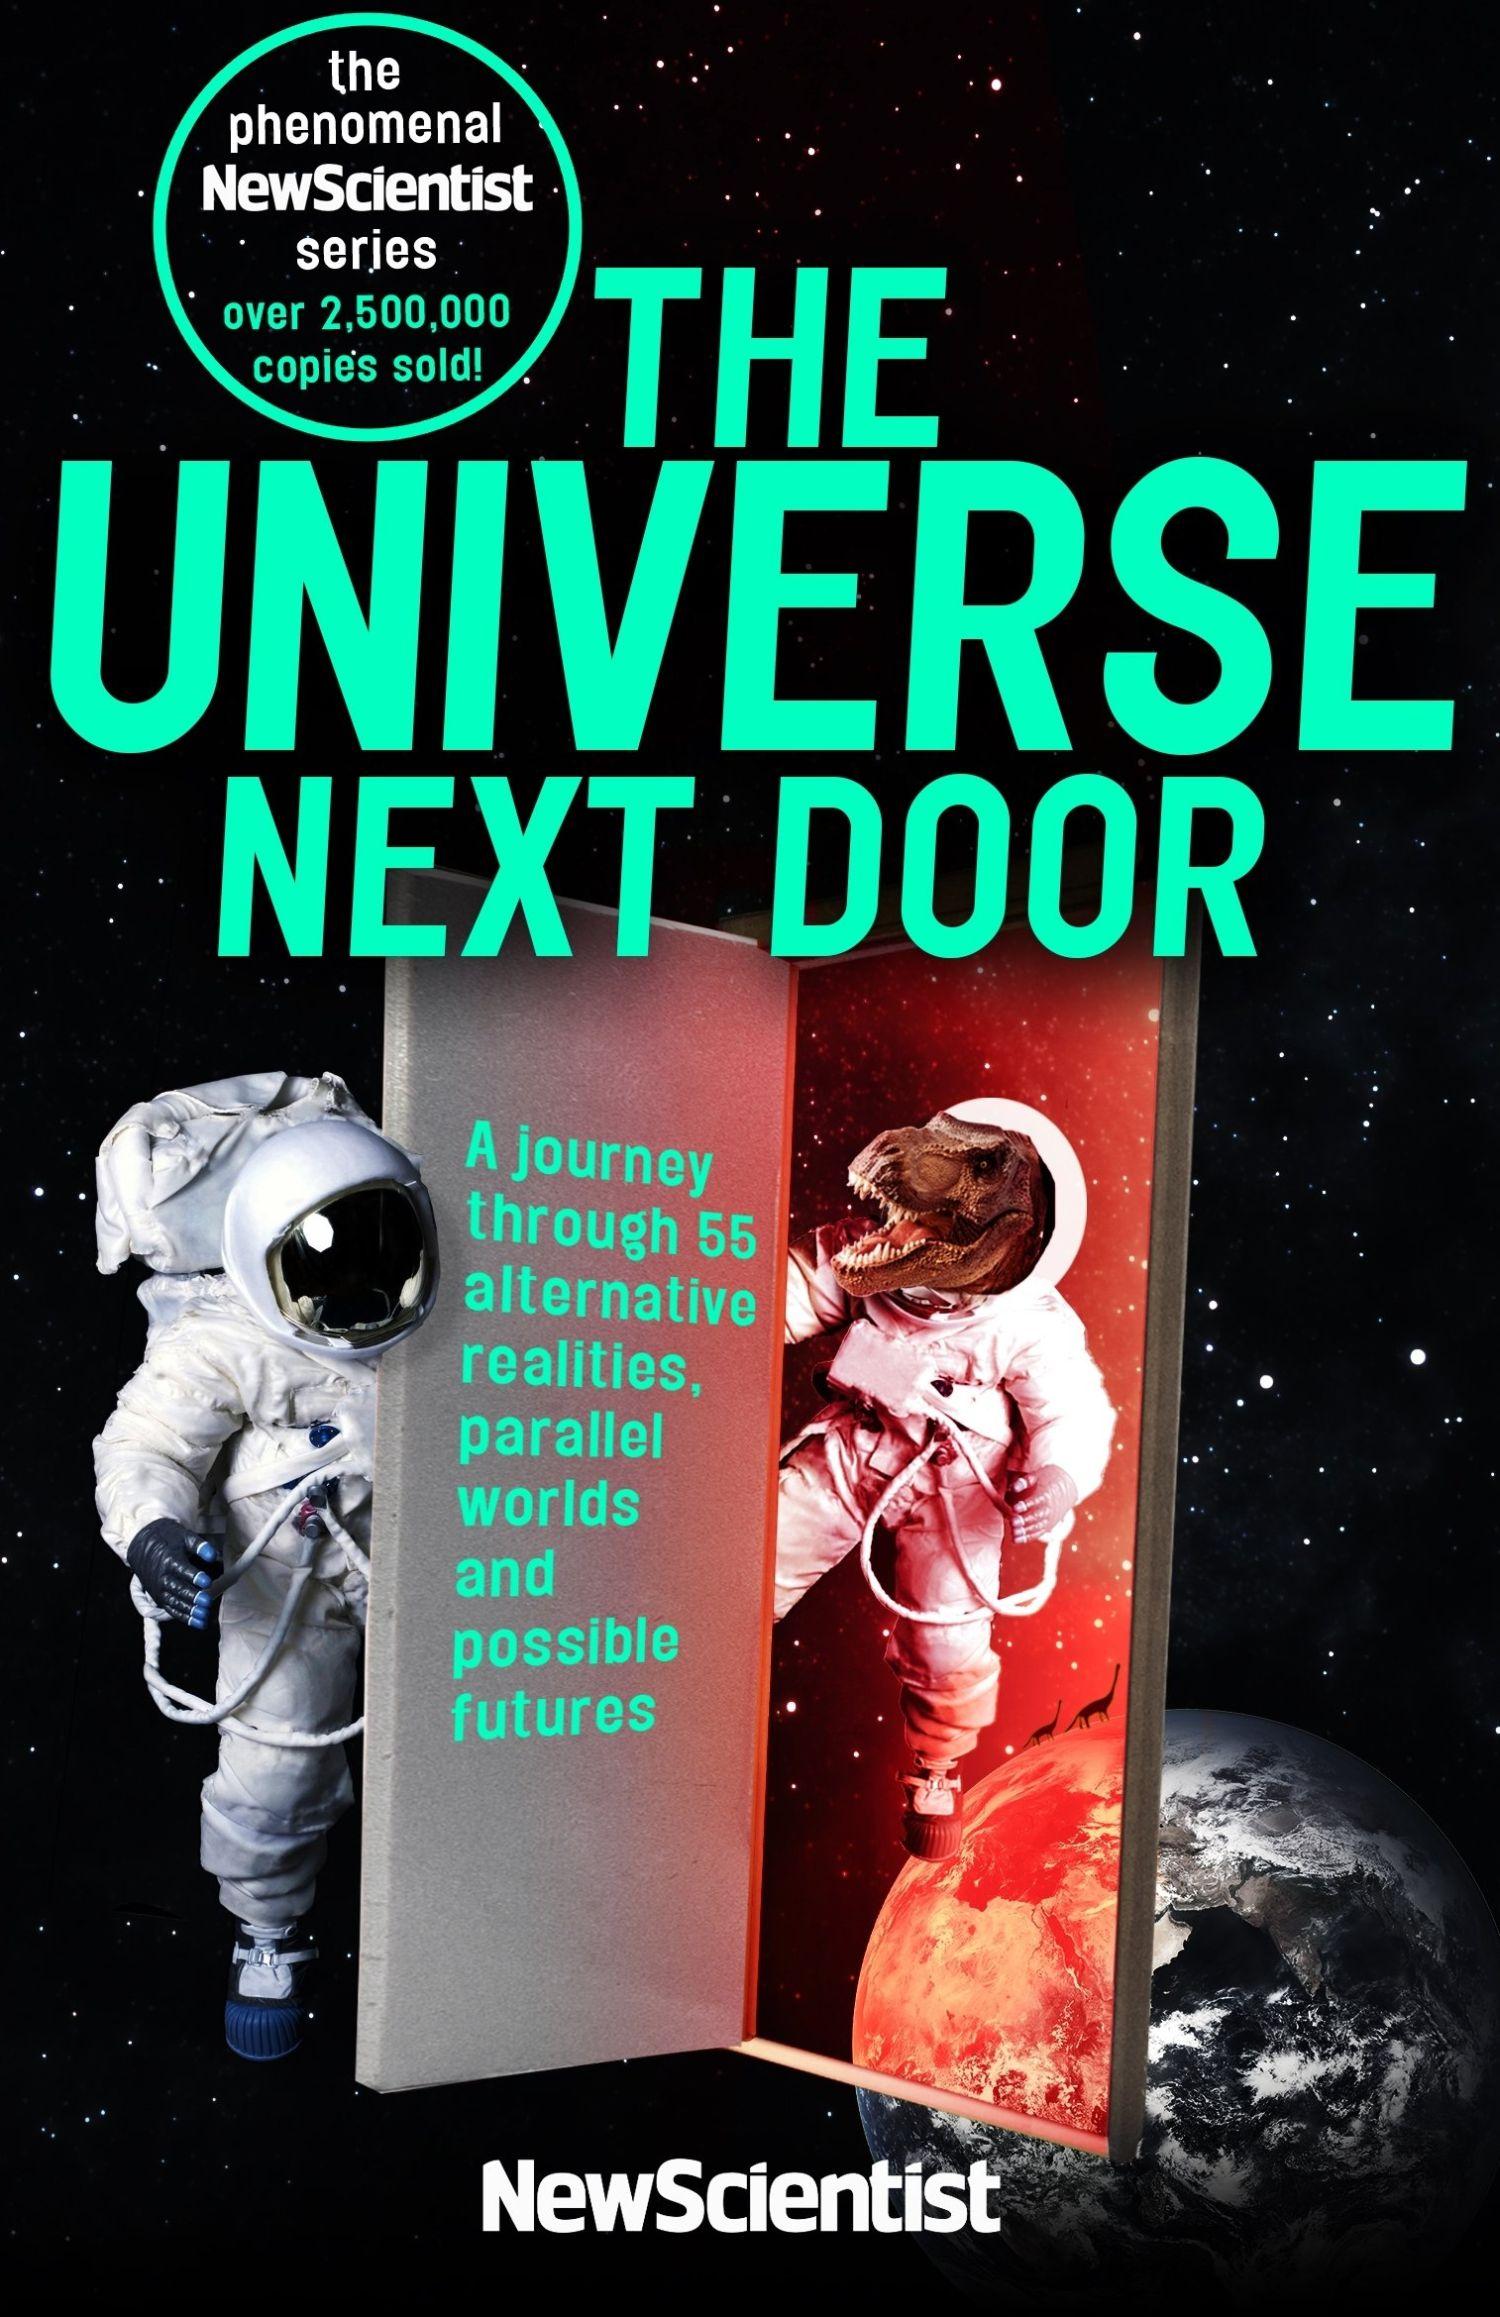 Universe Next Door: A Journey Through 55 Parallelworlds and Possible Futures